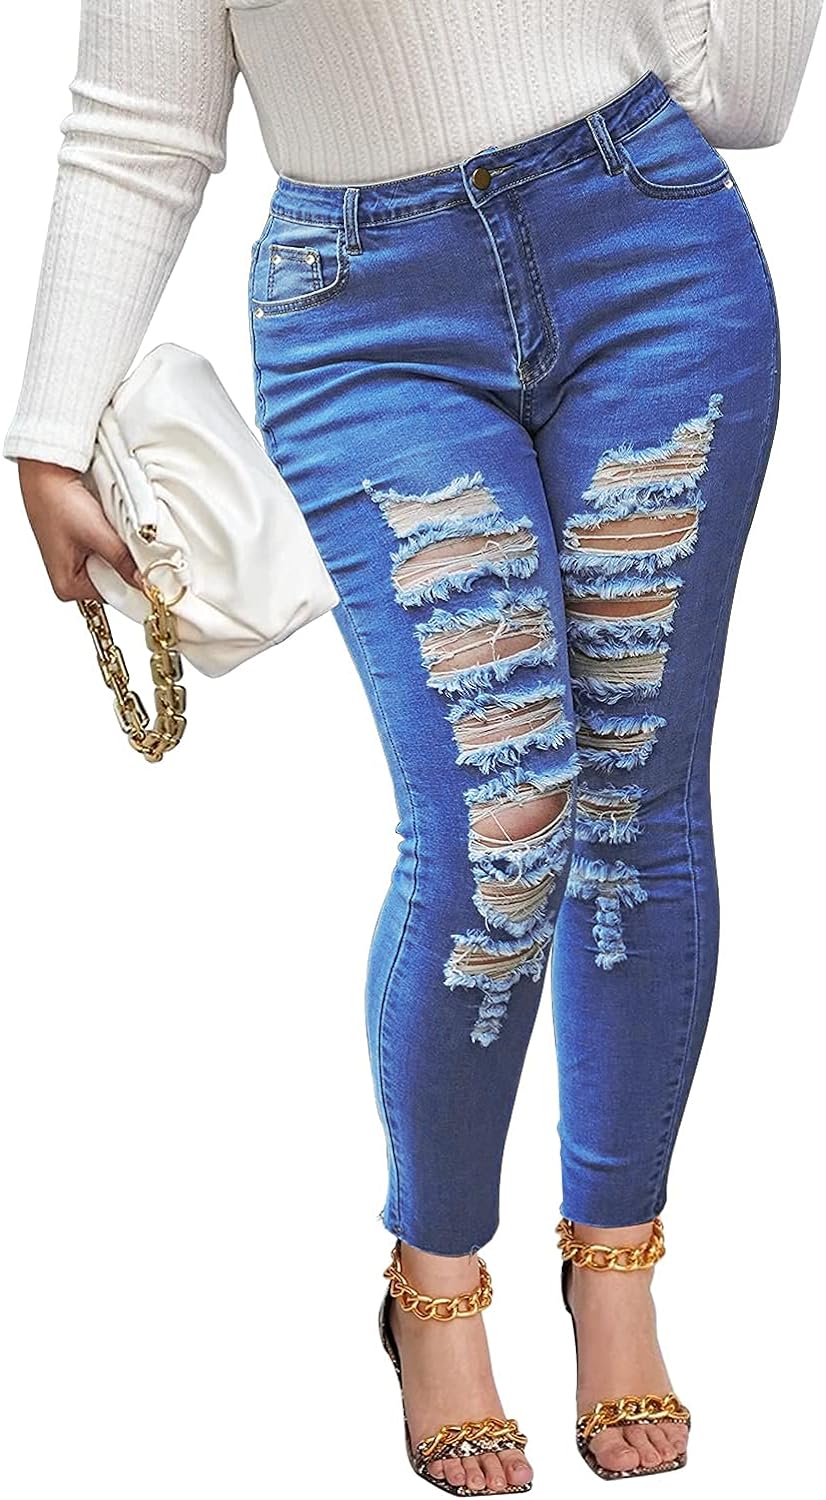 Women Jeans High Waist Plus Jeans for Women Stretch Distressed Ripped Skinny Denim Stretch Slim Length Jeans Pants